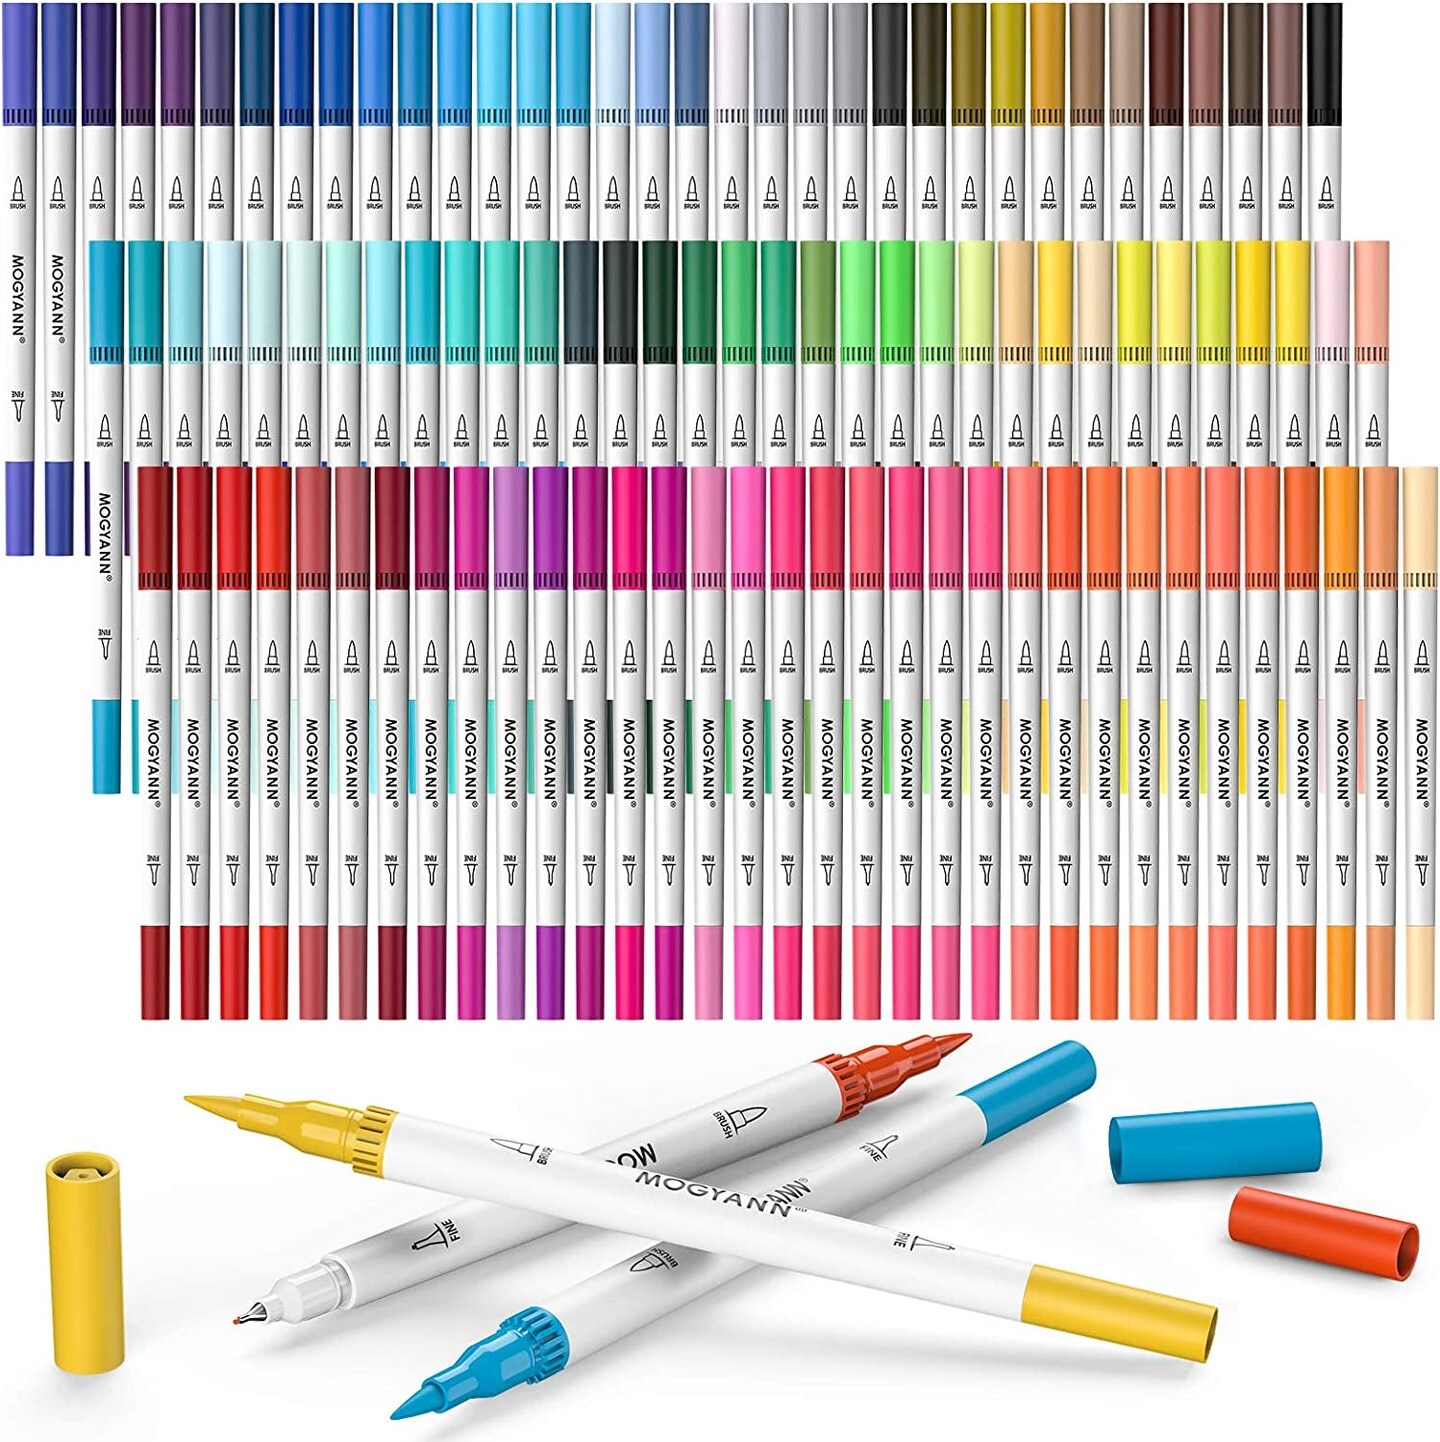 100 Unique Colors Dual Tip Brush Pens Non-Toxic Odorless Markers